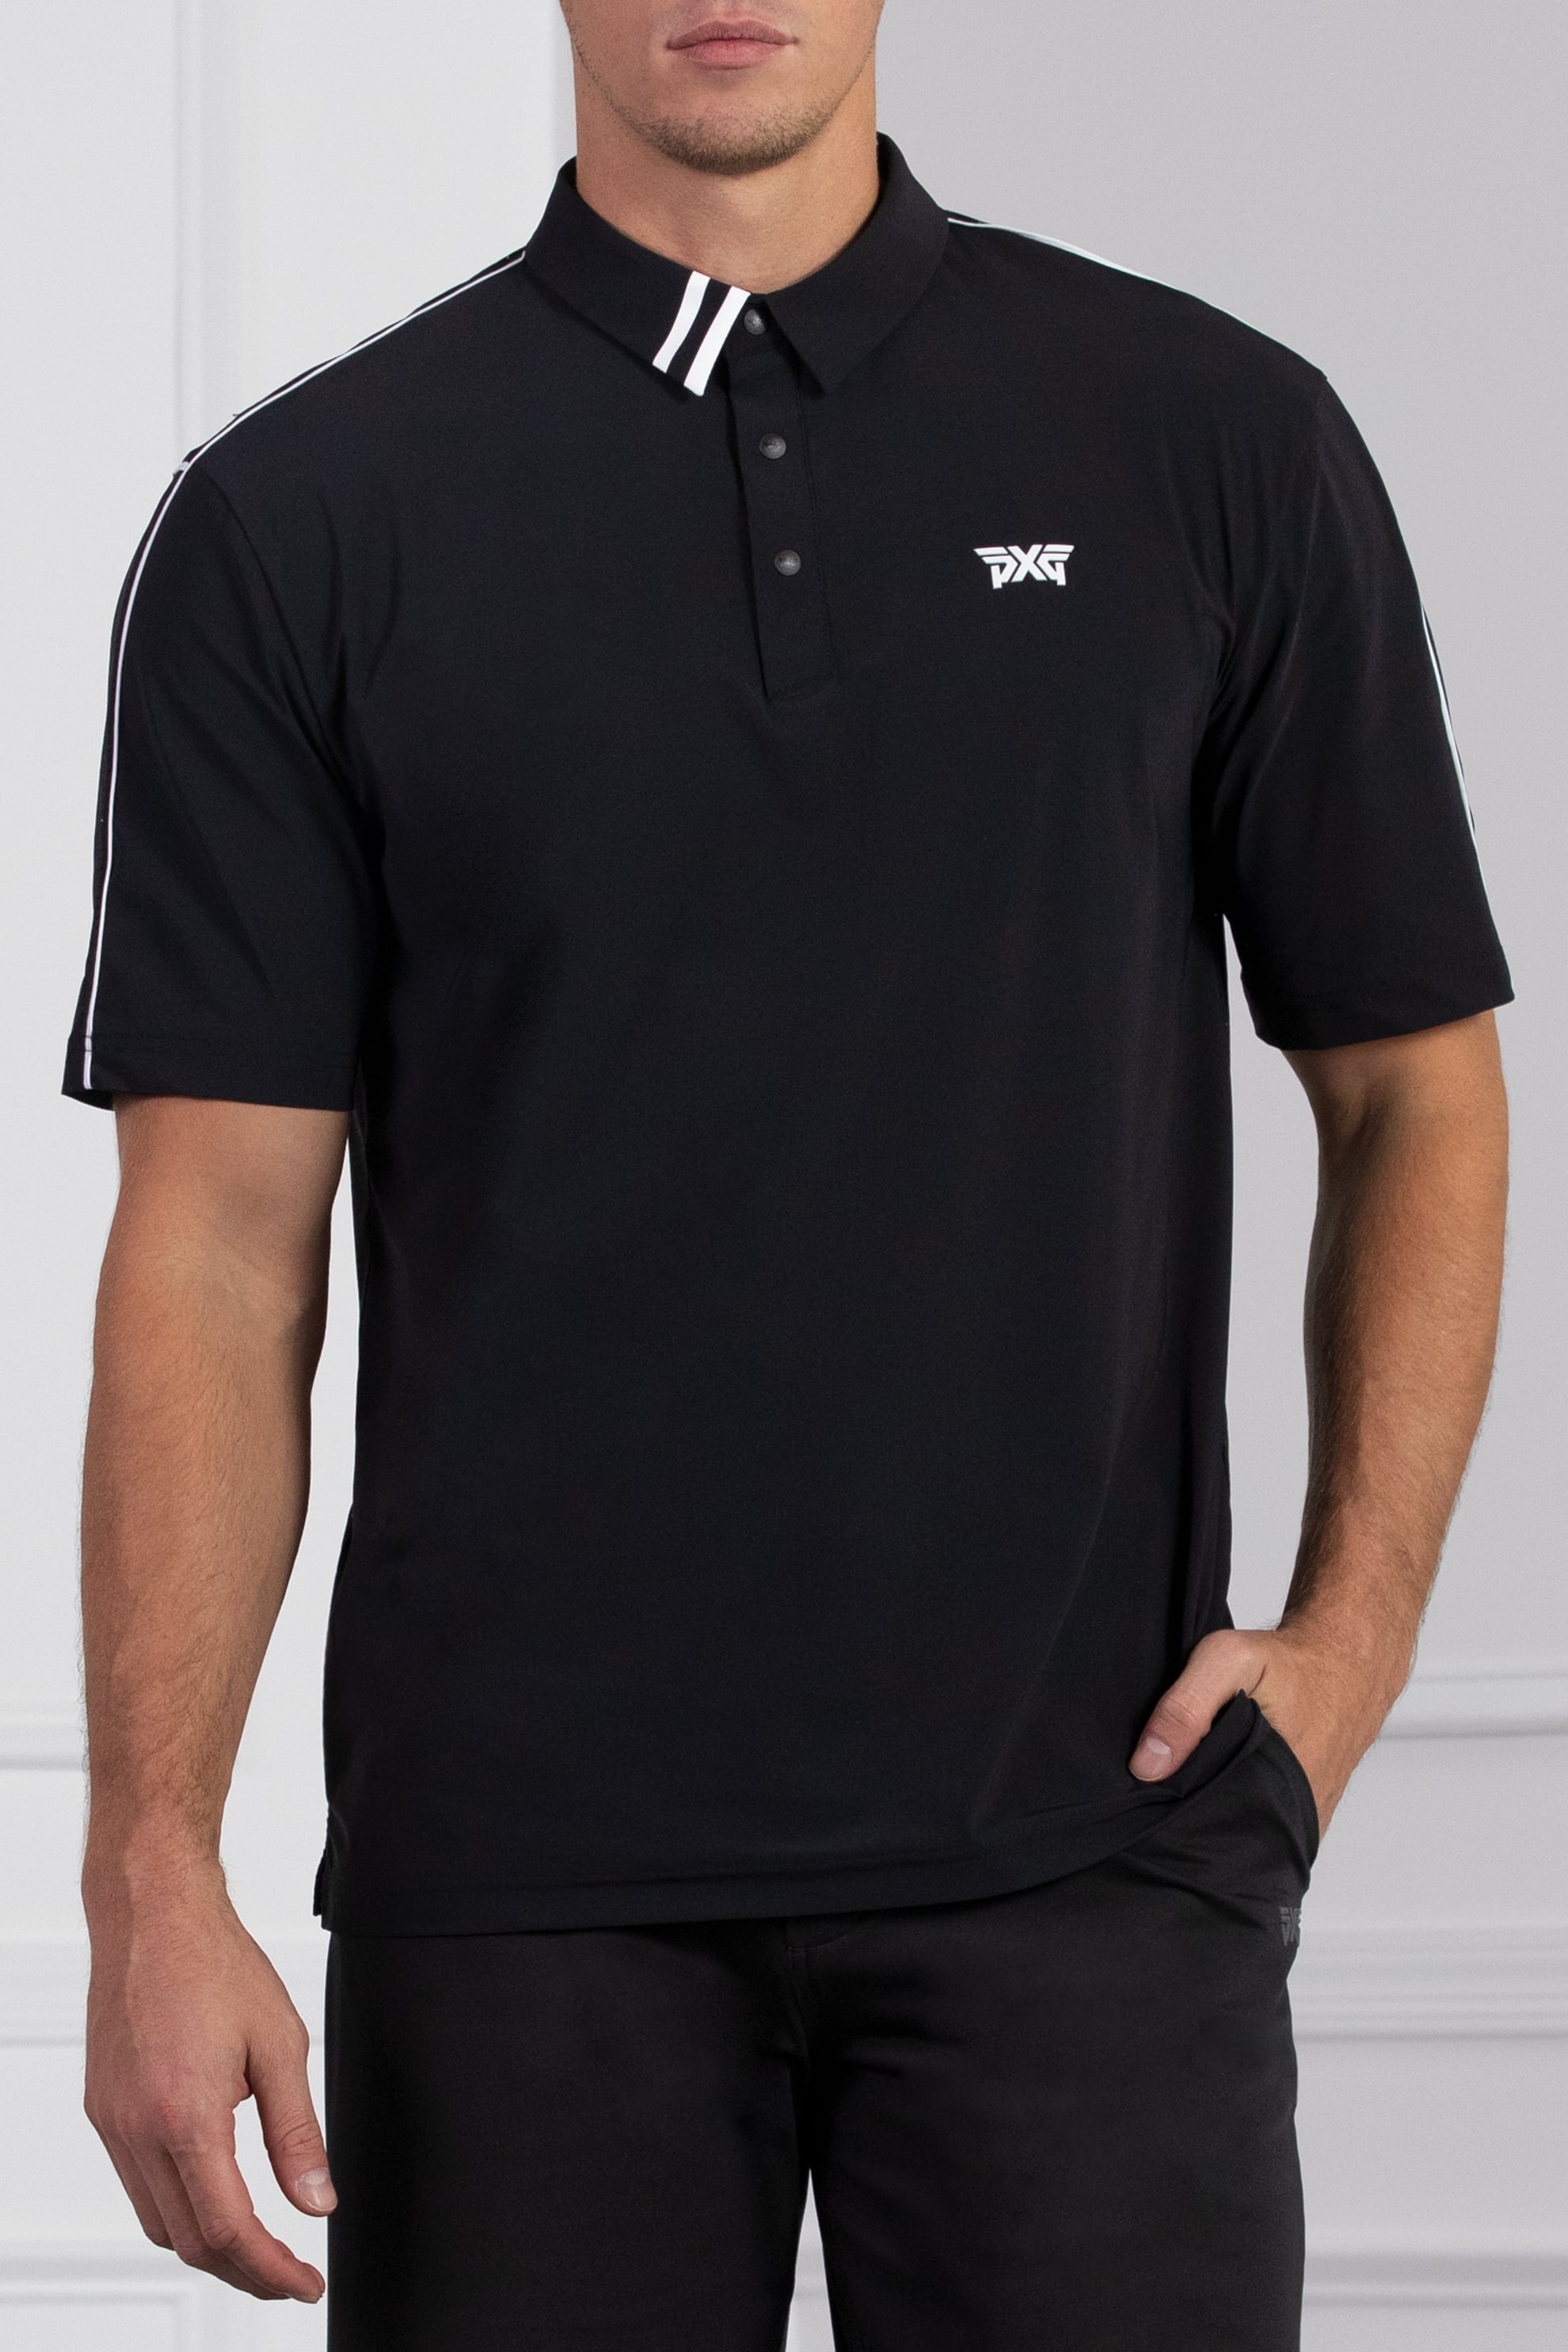 Comfort Fit Fineline Polo | Shop the Highest Quality Golf Apparel, Gear,  Accessories and Golf Clubs at PXG